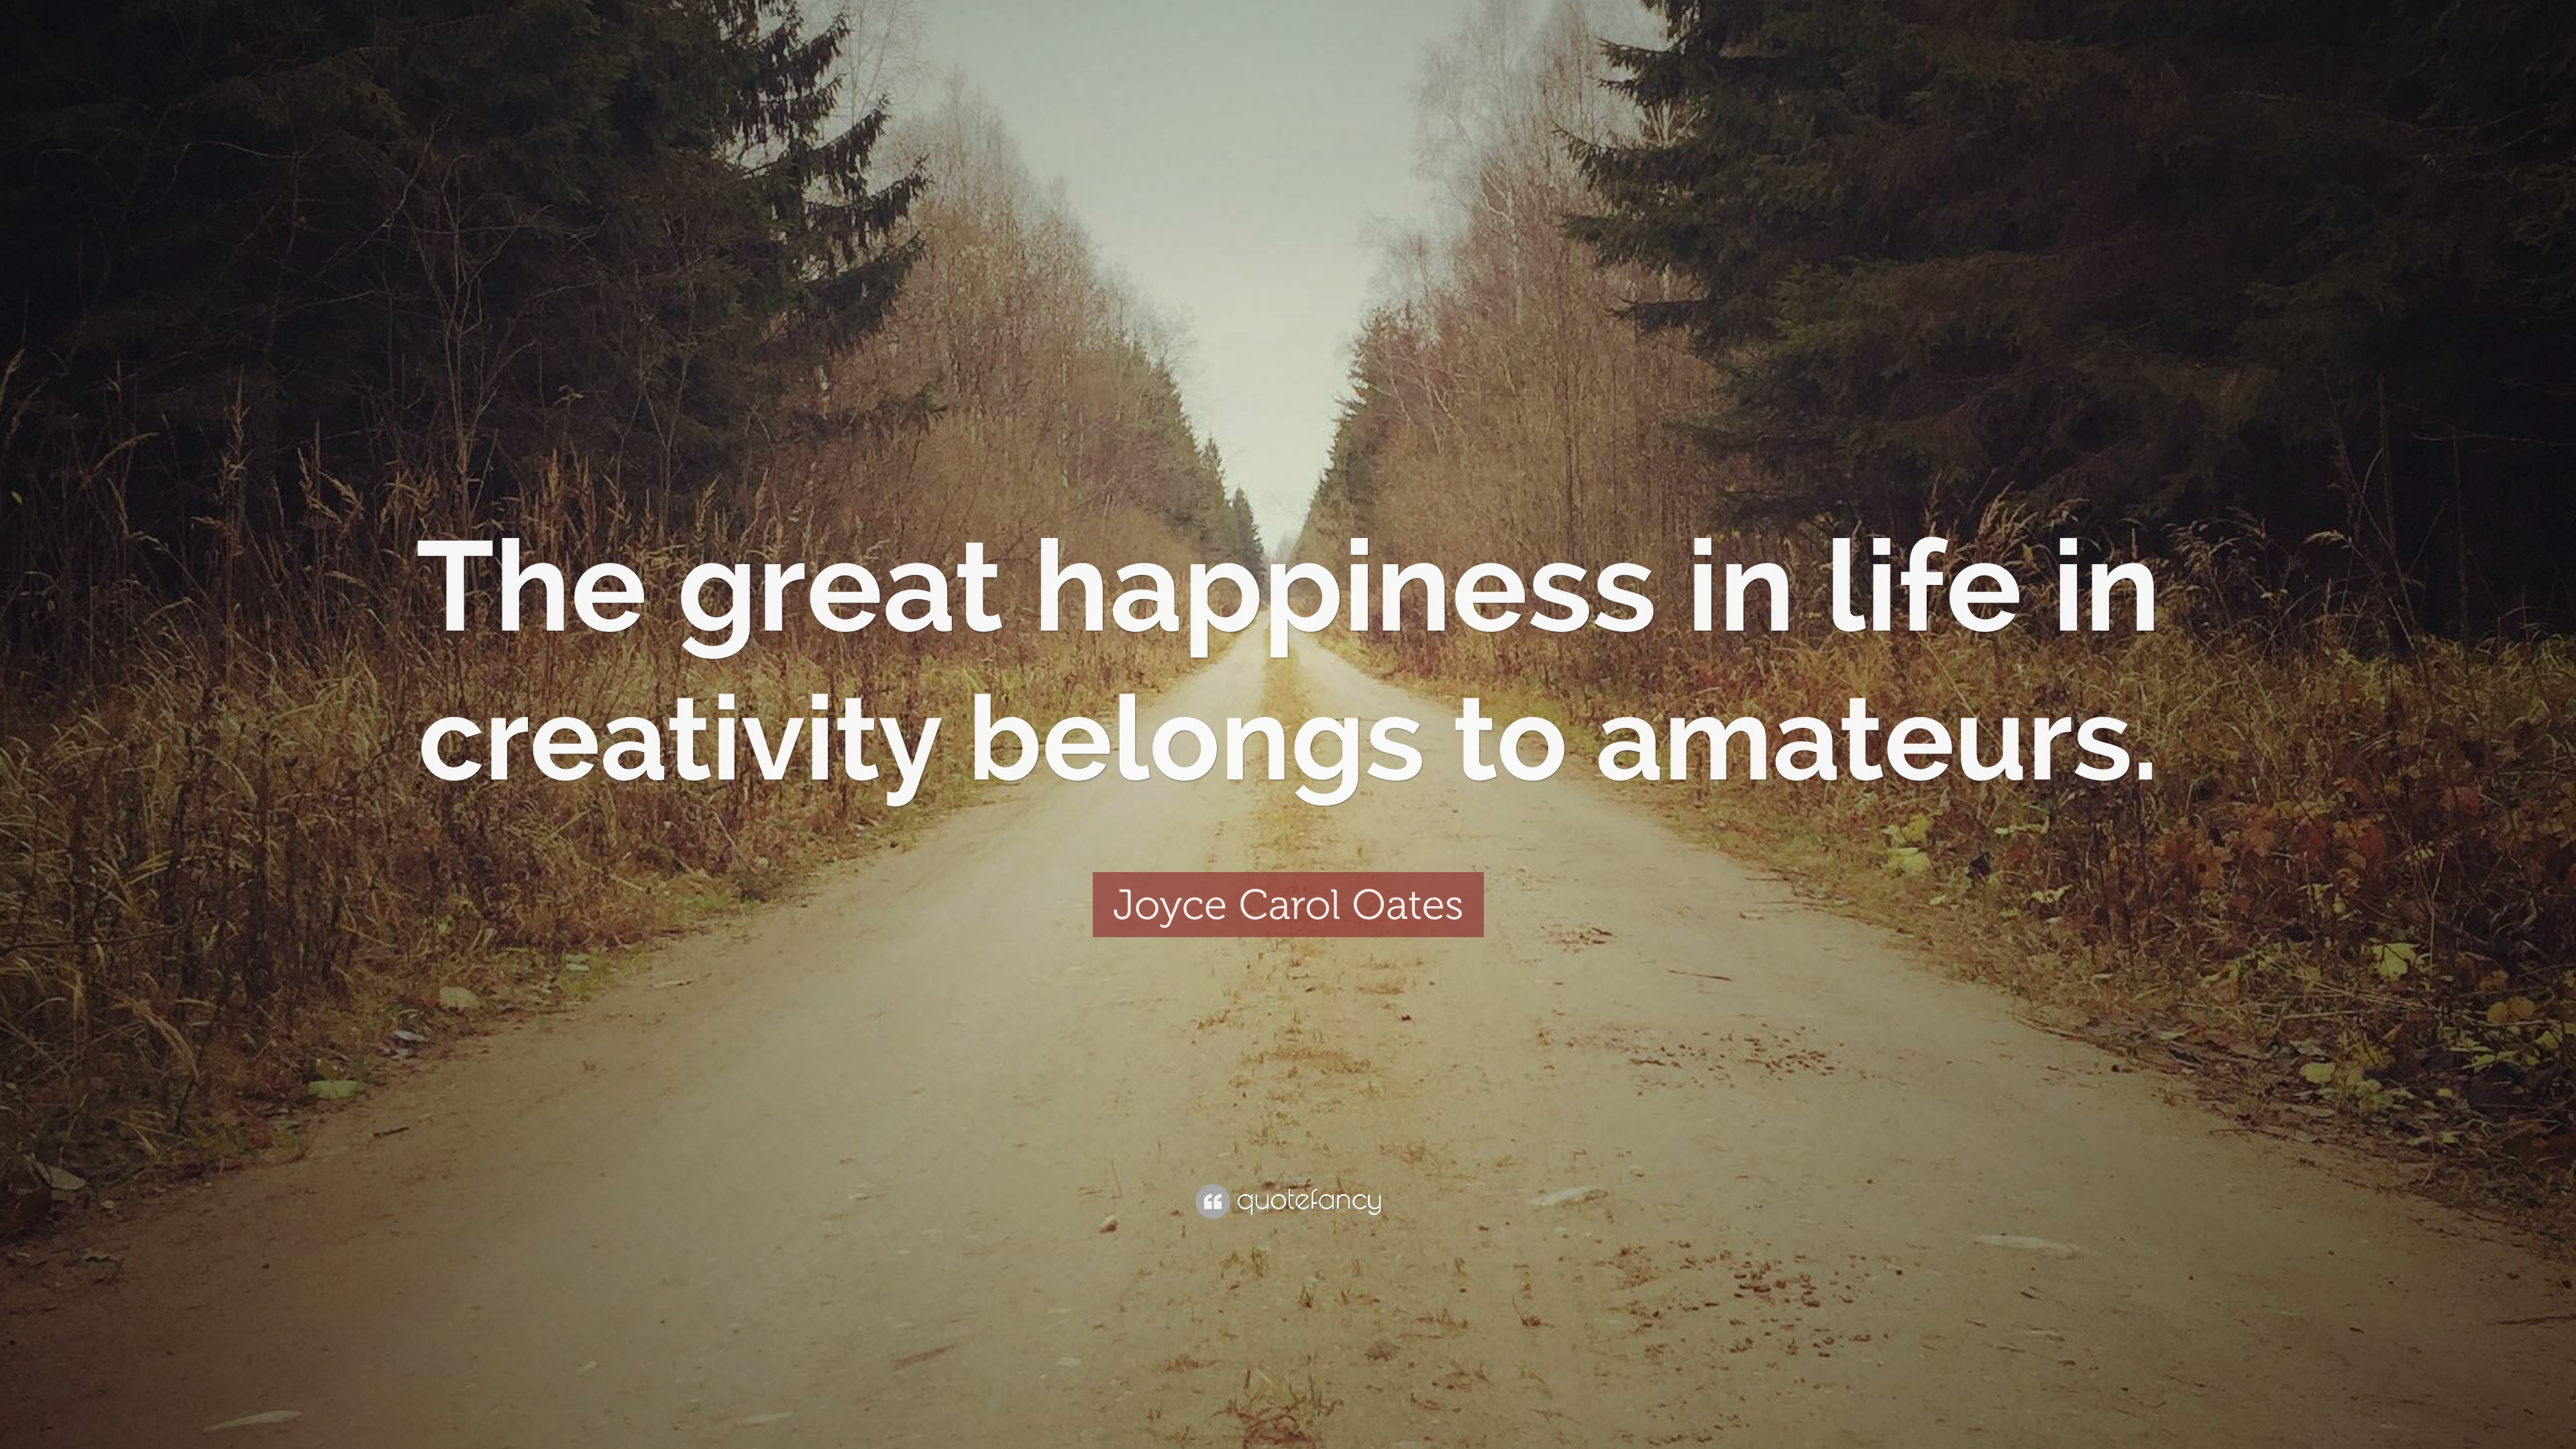 Joyce Carol Oates Quote: “The great happiness in life in creativity ...